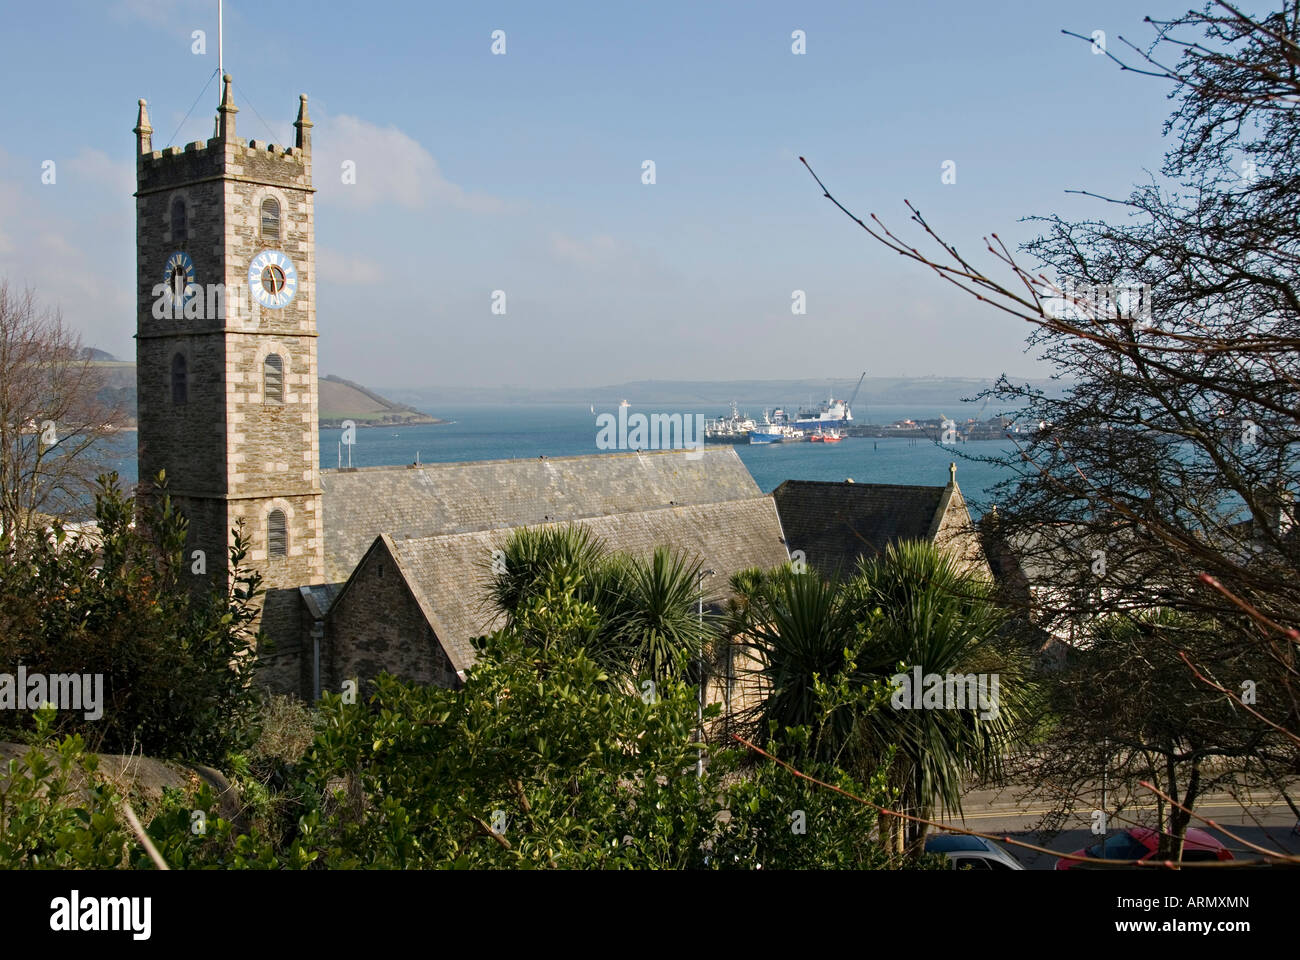 Falmouth, Cornwall, UK. The Church of King Charles the Martyr, 1665, with Carrick Roads (the River Fal estuary) in the background Stock Photo